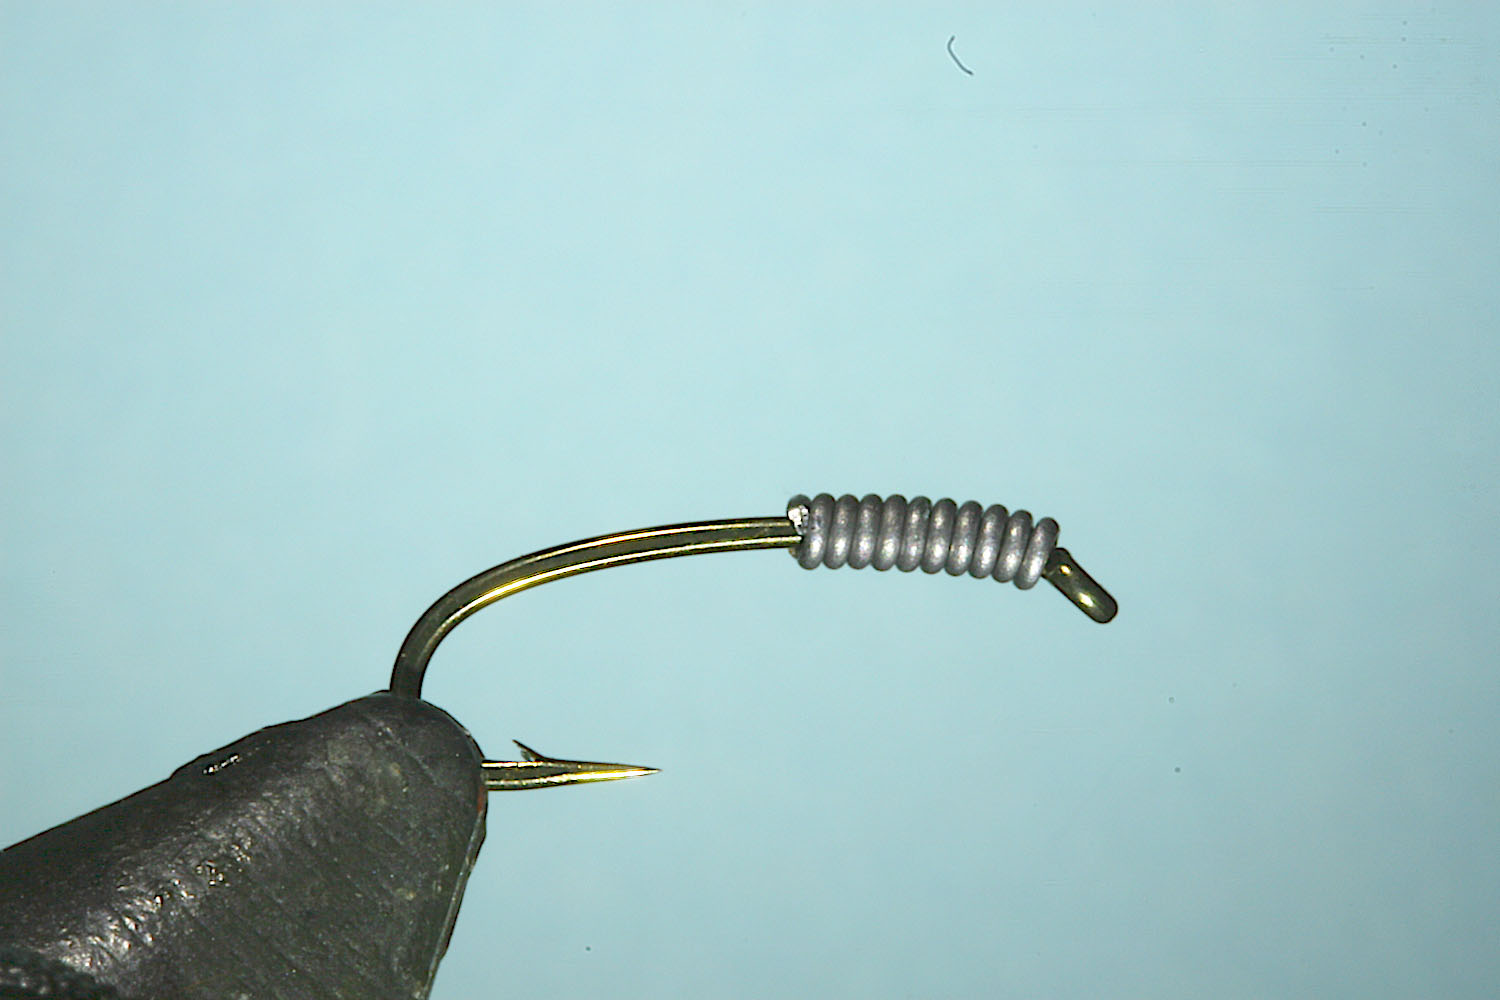 Step 1 of tying sequence for jelly crimp nymph fly